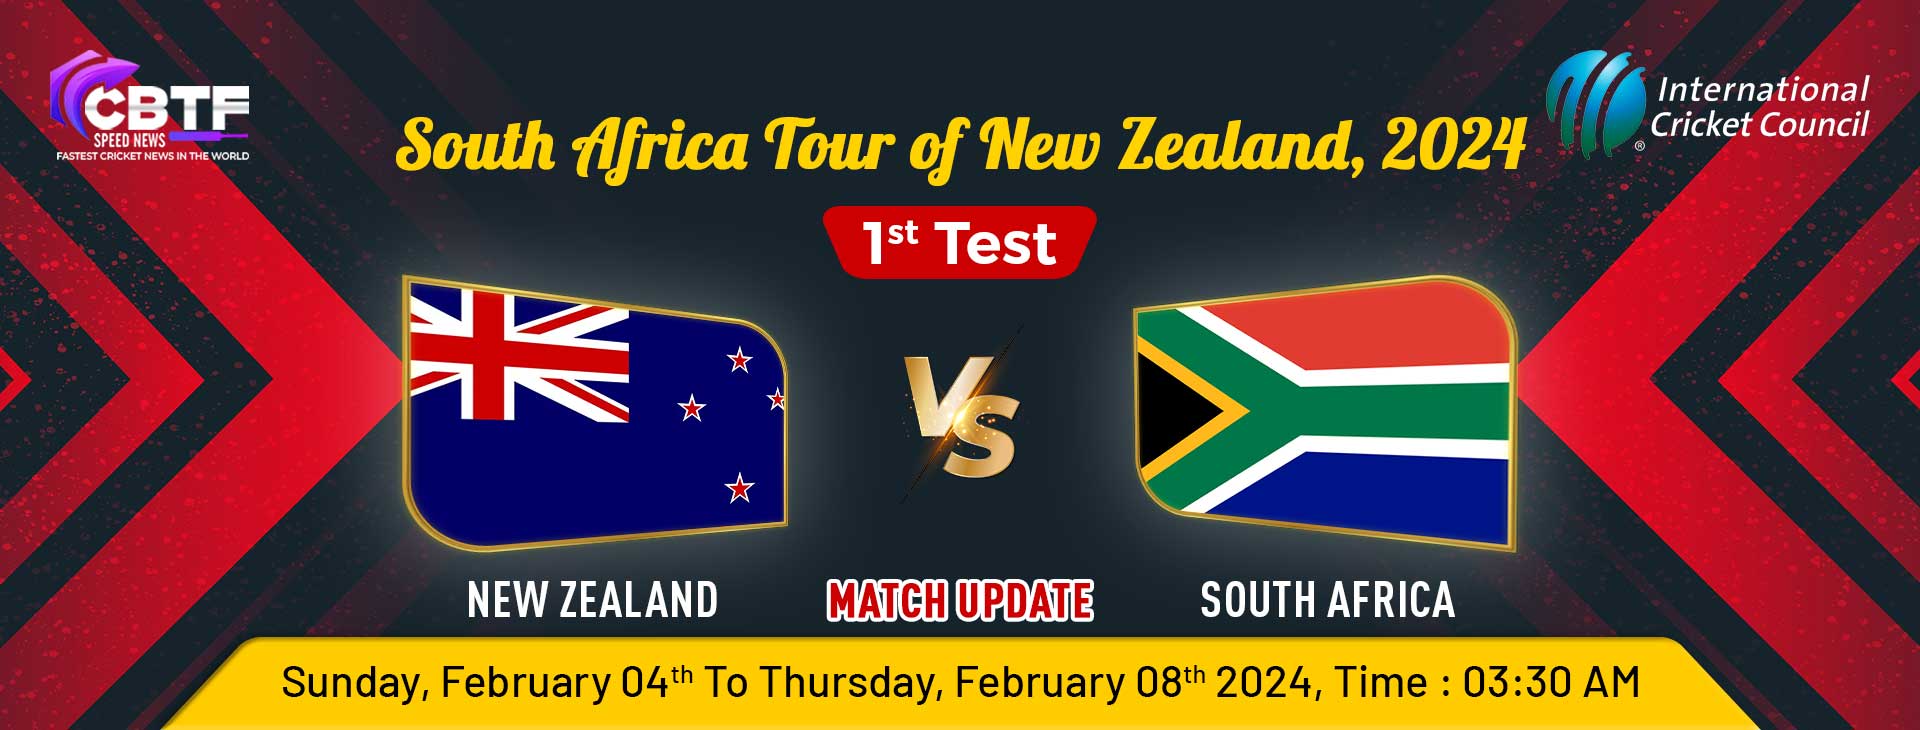 south africa tour of new zealand